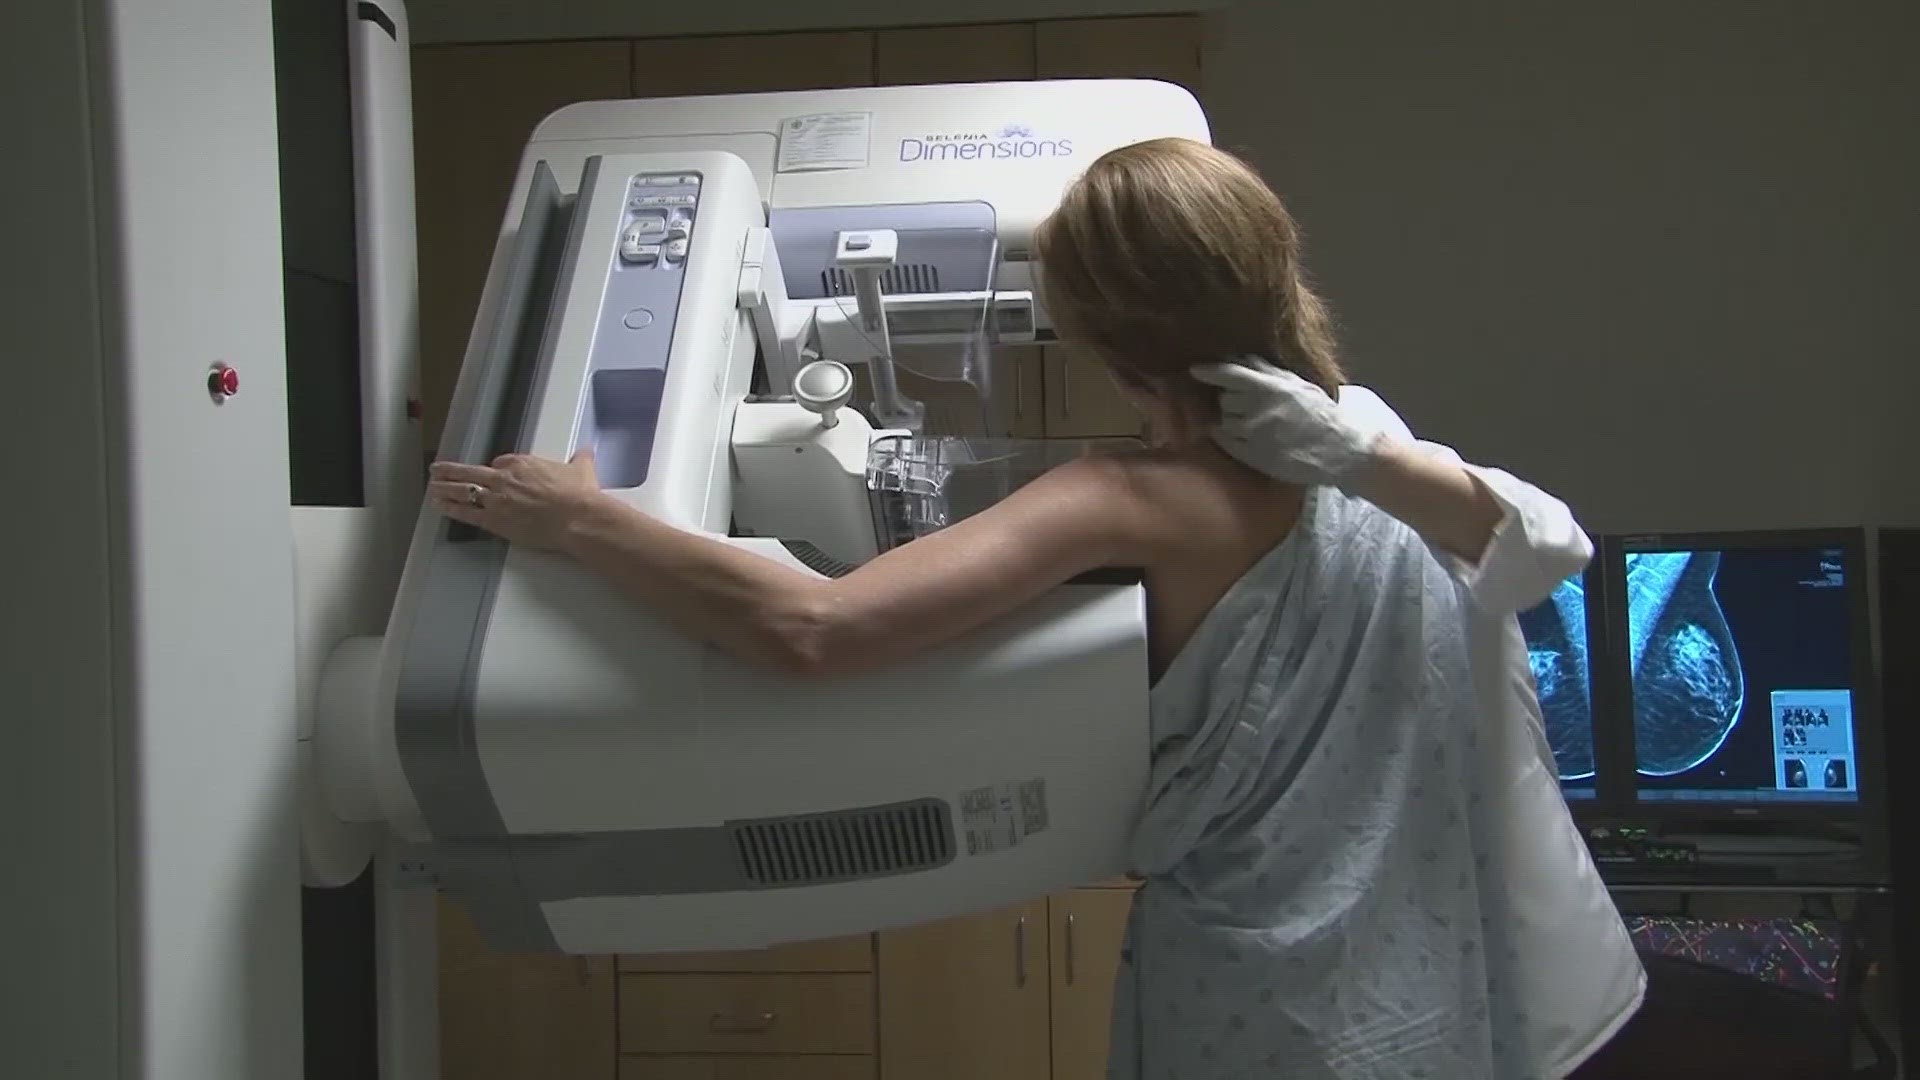 New research shows many women aren't getting screening for breast cancer that is recommended